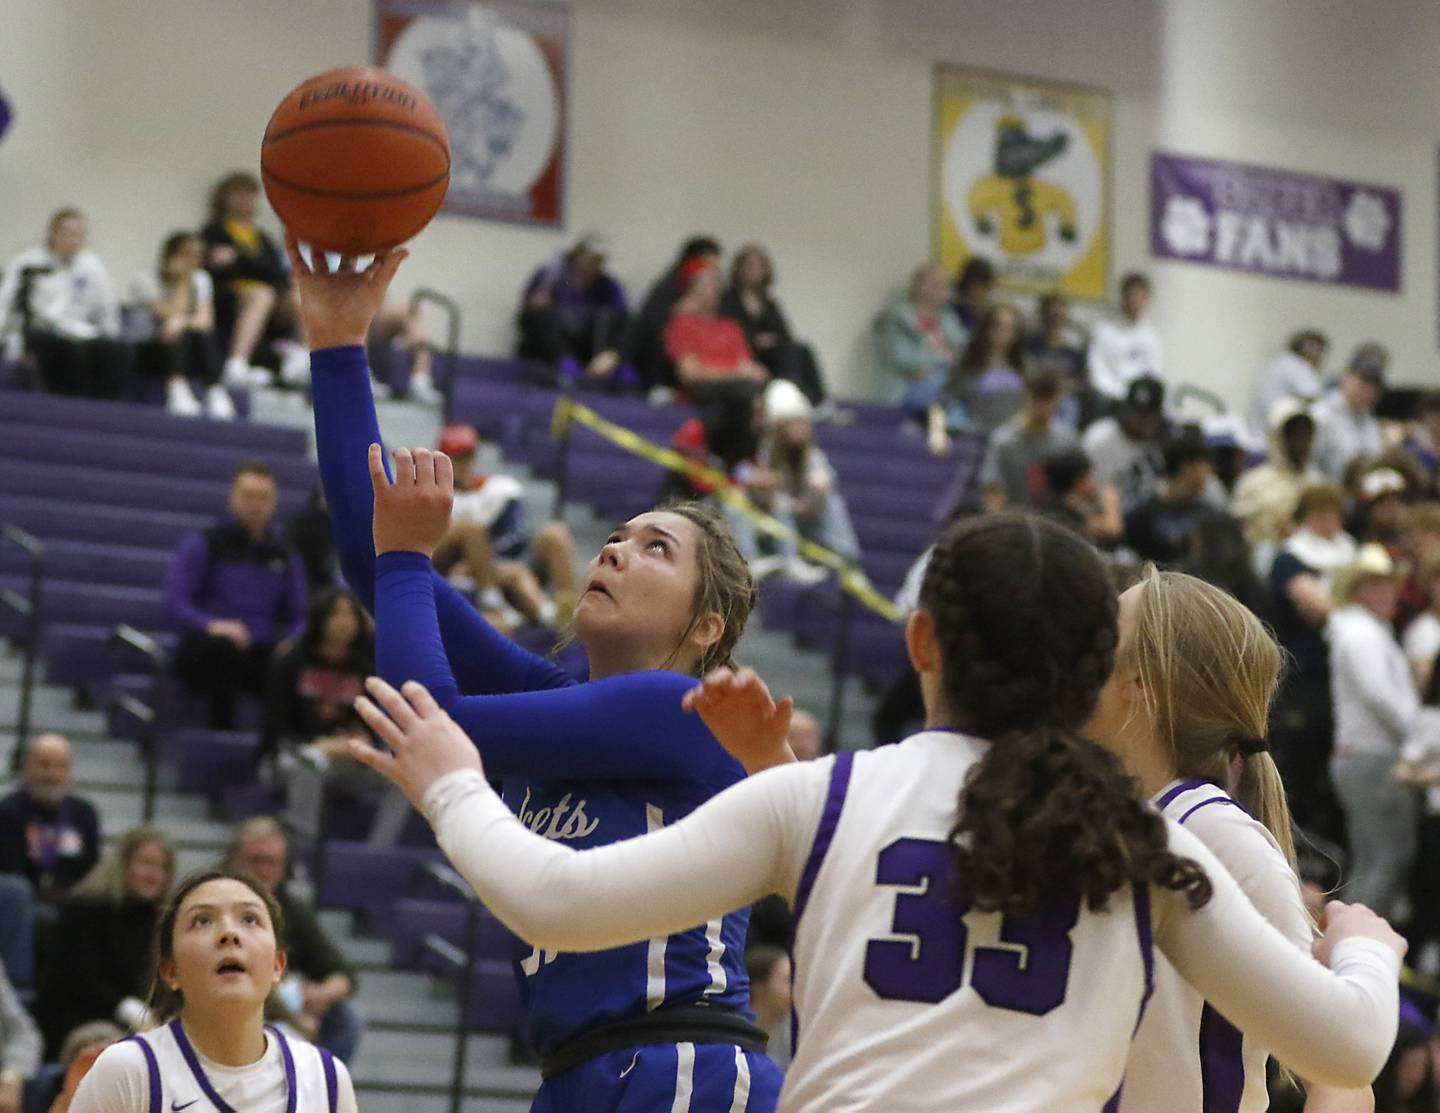 Burlington Central's Emma Payton shoots the ball over Hampshire's Ashley Herzing during a Fox Valley Conference girls basketball game Friday, Jan. 20, 2023, at Hampshire High School.